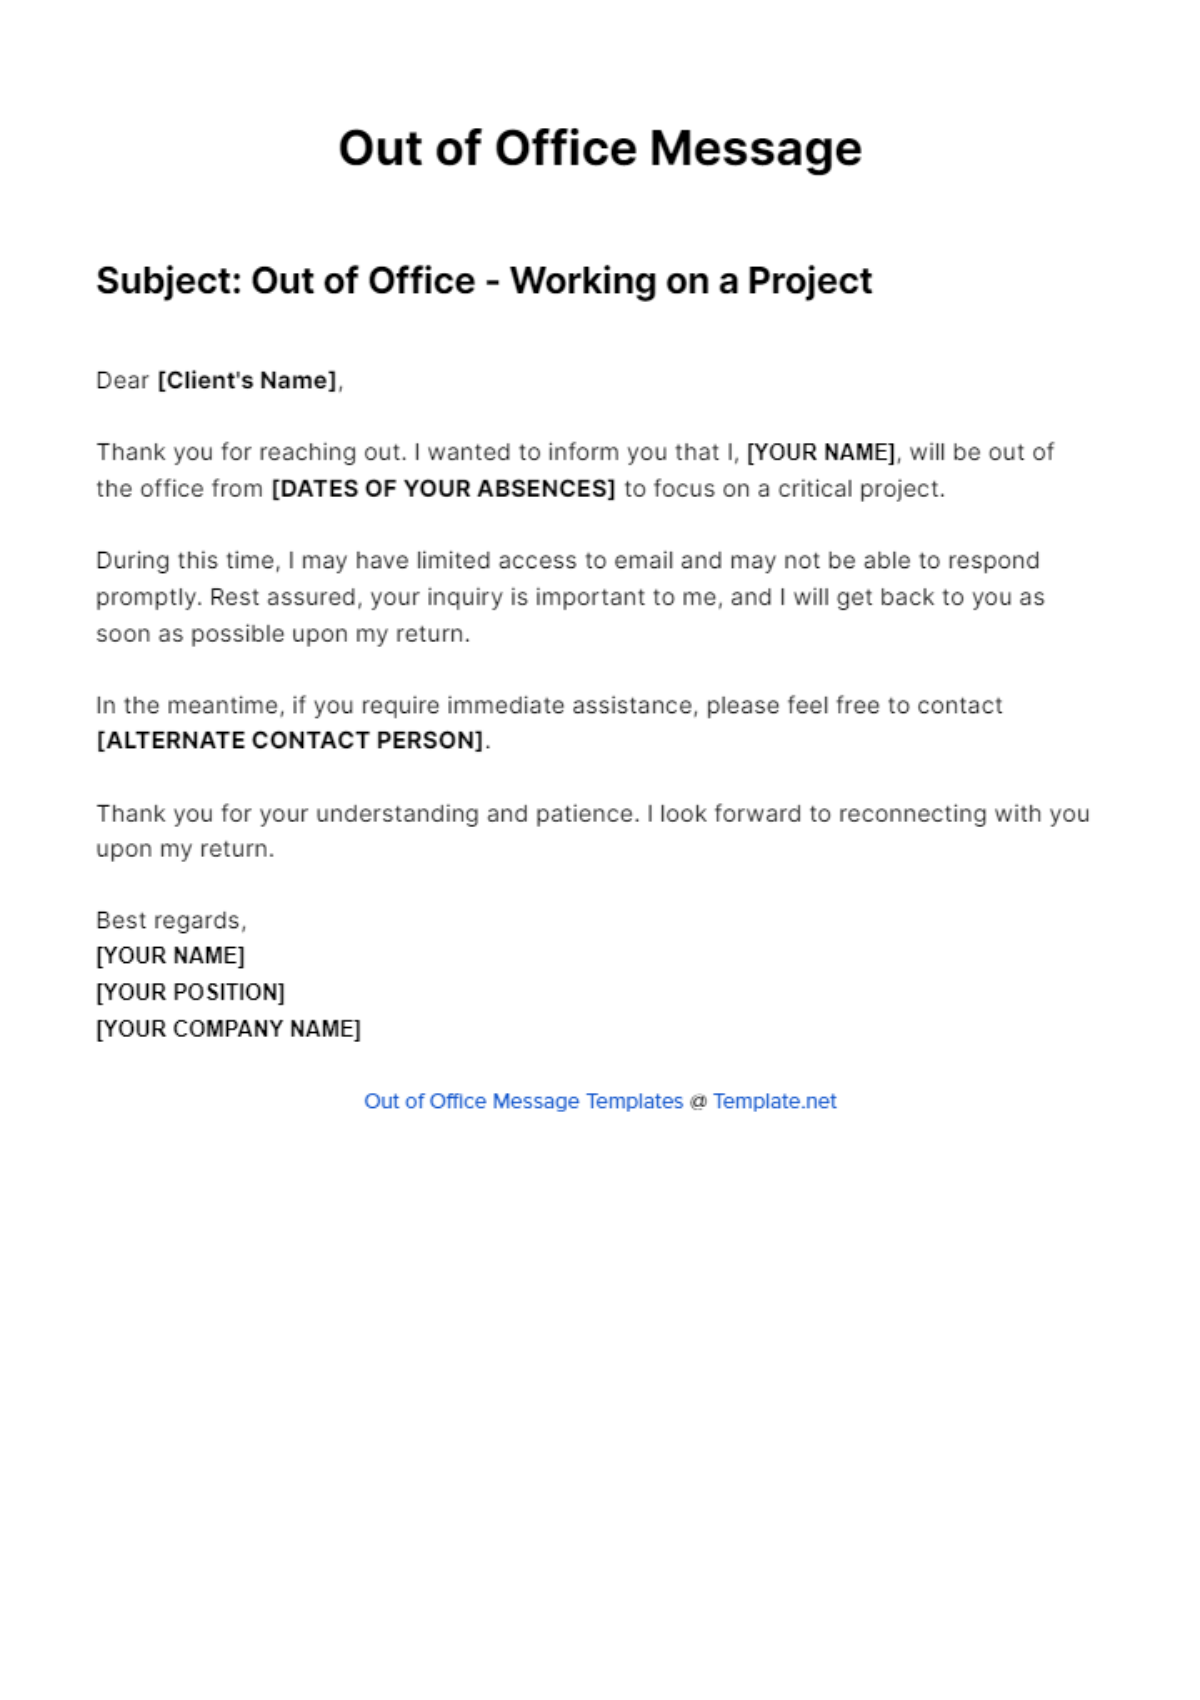 Out Of Office Message For Working On A Project Template